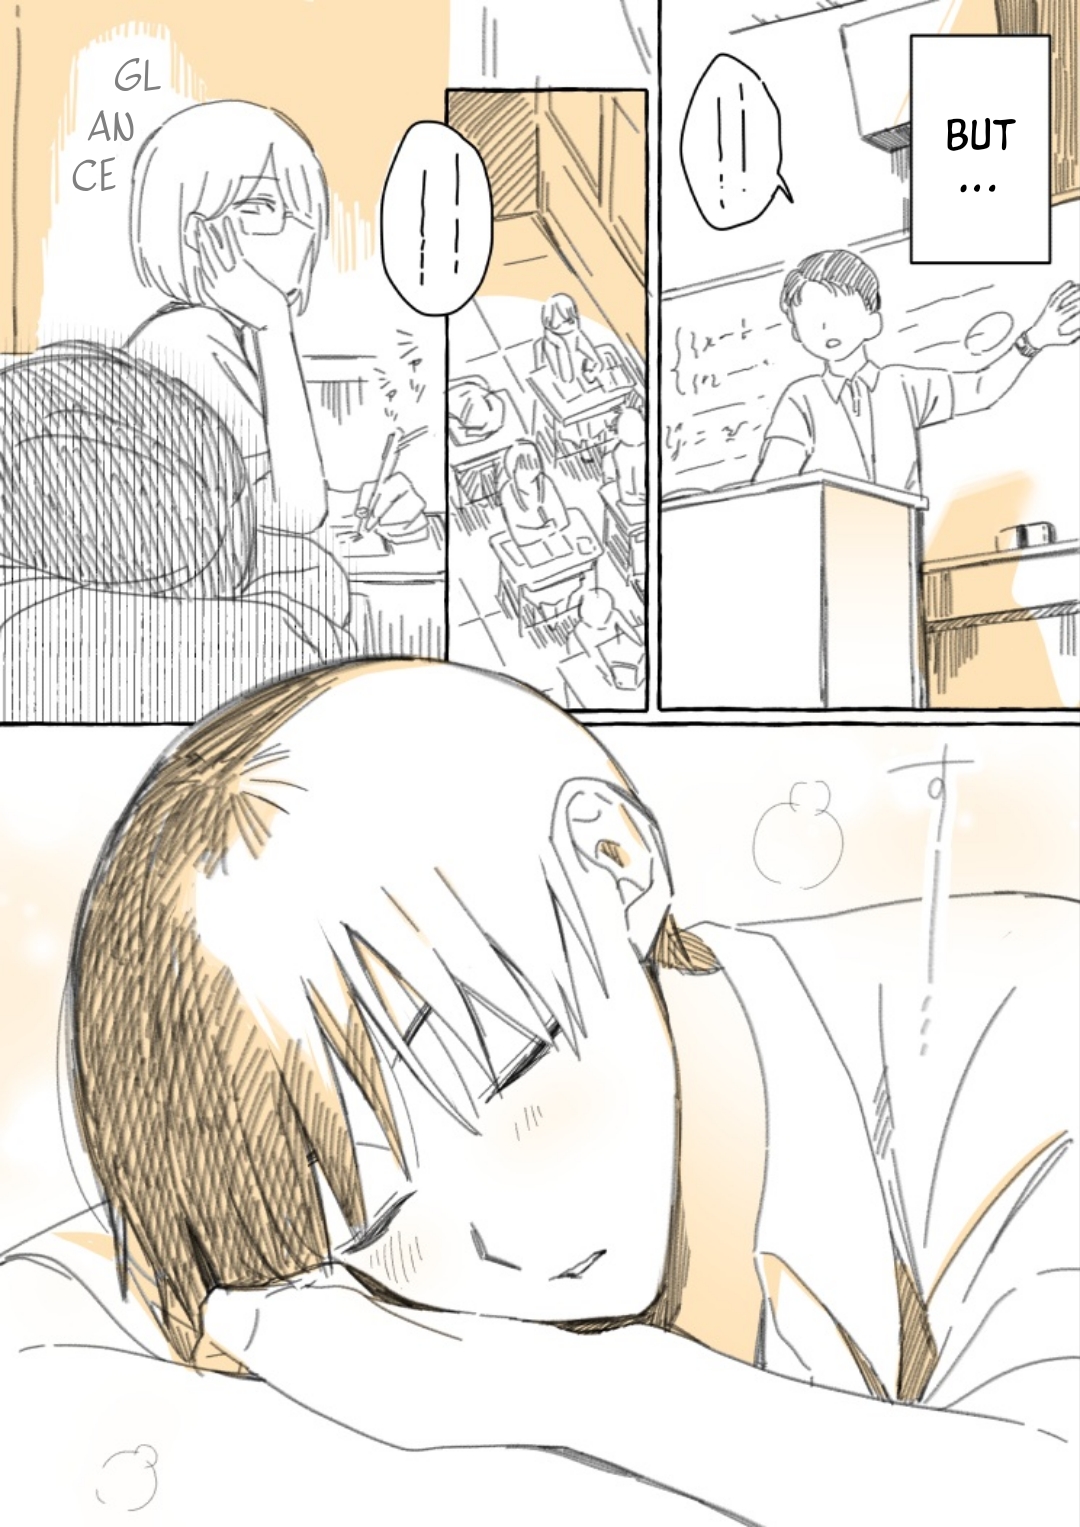 Short Manga Scribbles About the Person Next to Me